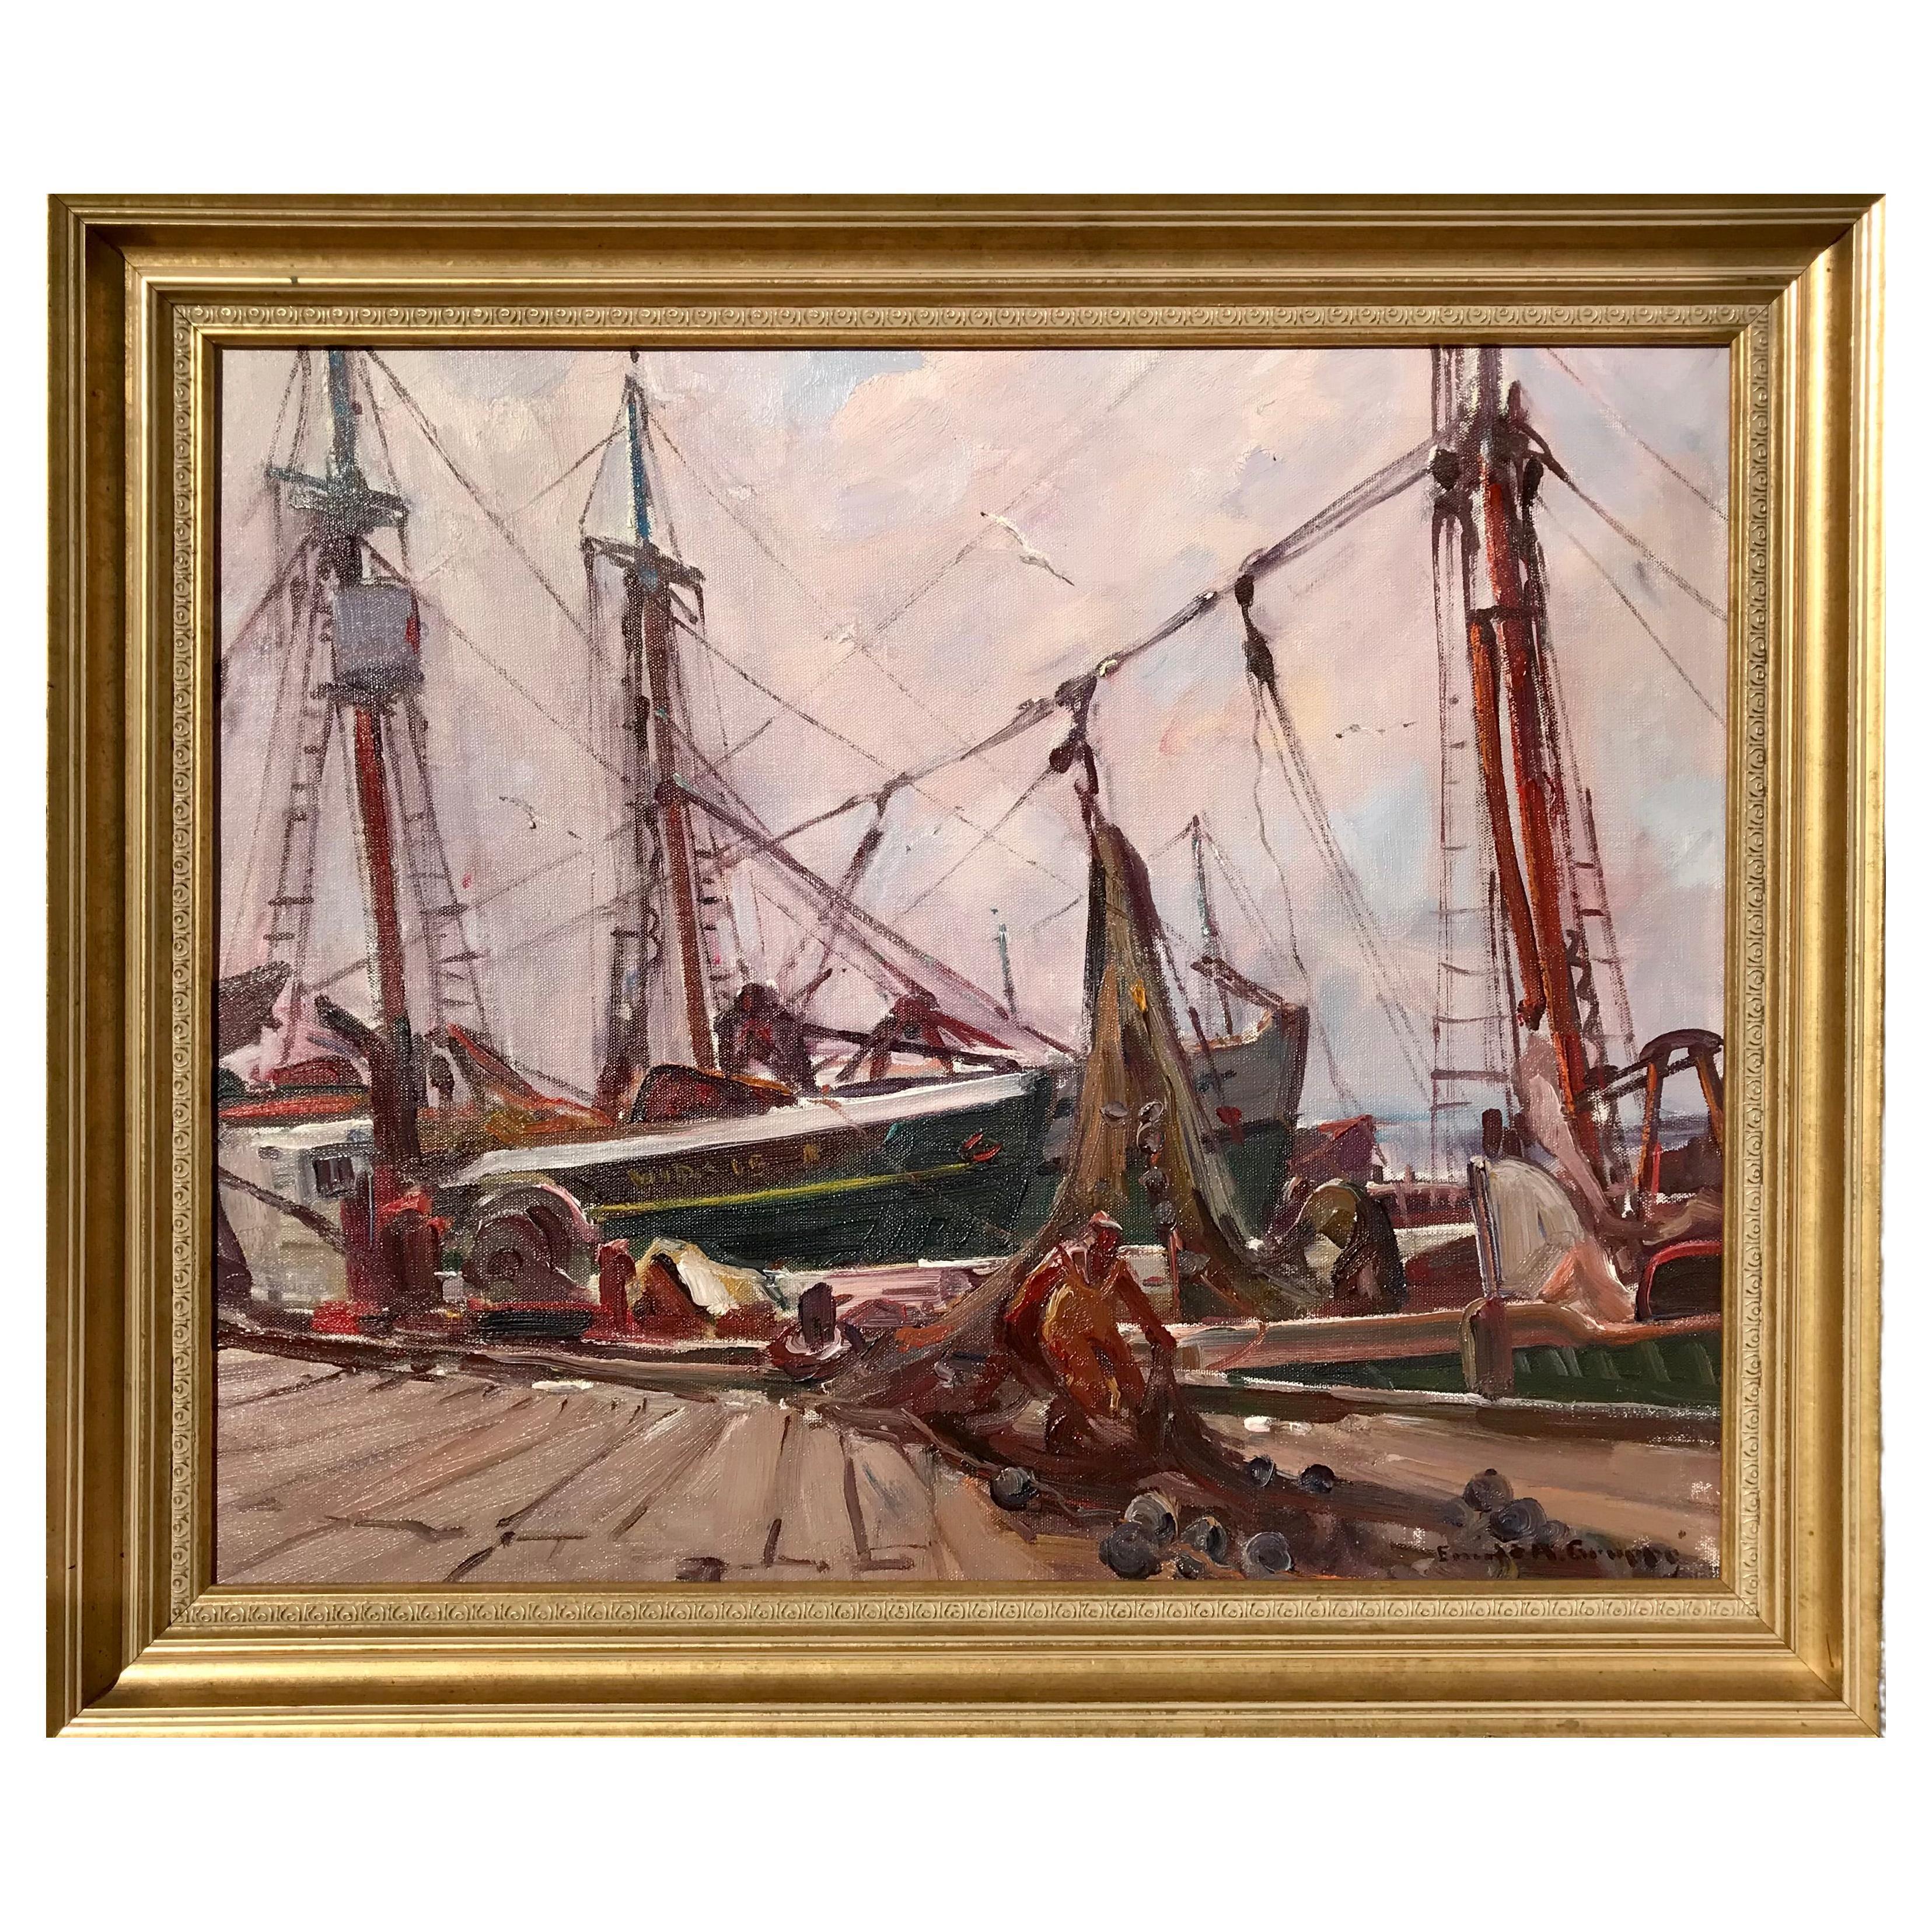 GRUPPE Emile Albert, (American, 1896-1978) 
Title: “Gray Day, Gloucester” 
Oil on Canvas 
Painting: 20' x 24 Inches
Signed lower right: Emile A Gruppe 
Framed: 24.5 x 28.75 Inches (Newer and not original)
Condition: Excellent. No issues.

Another